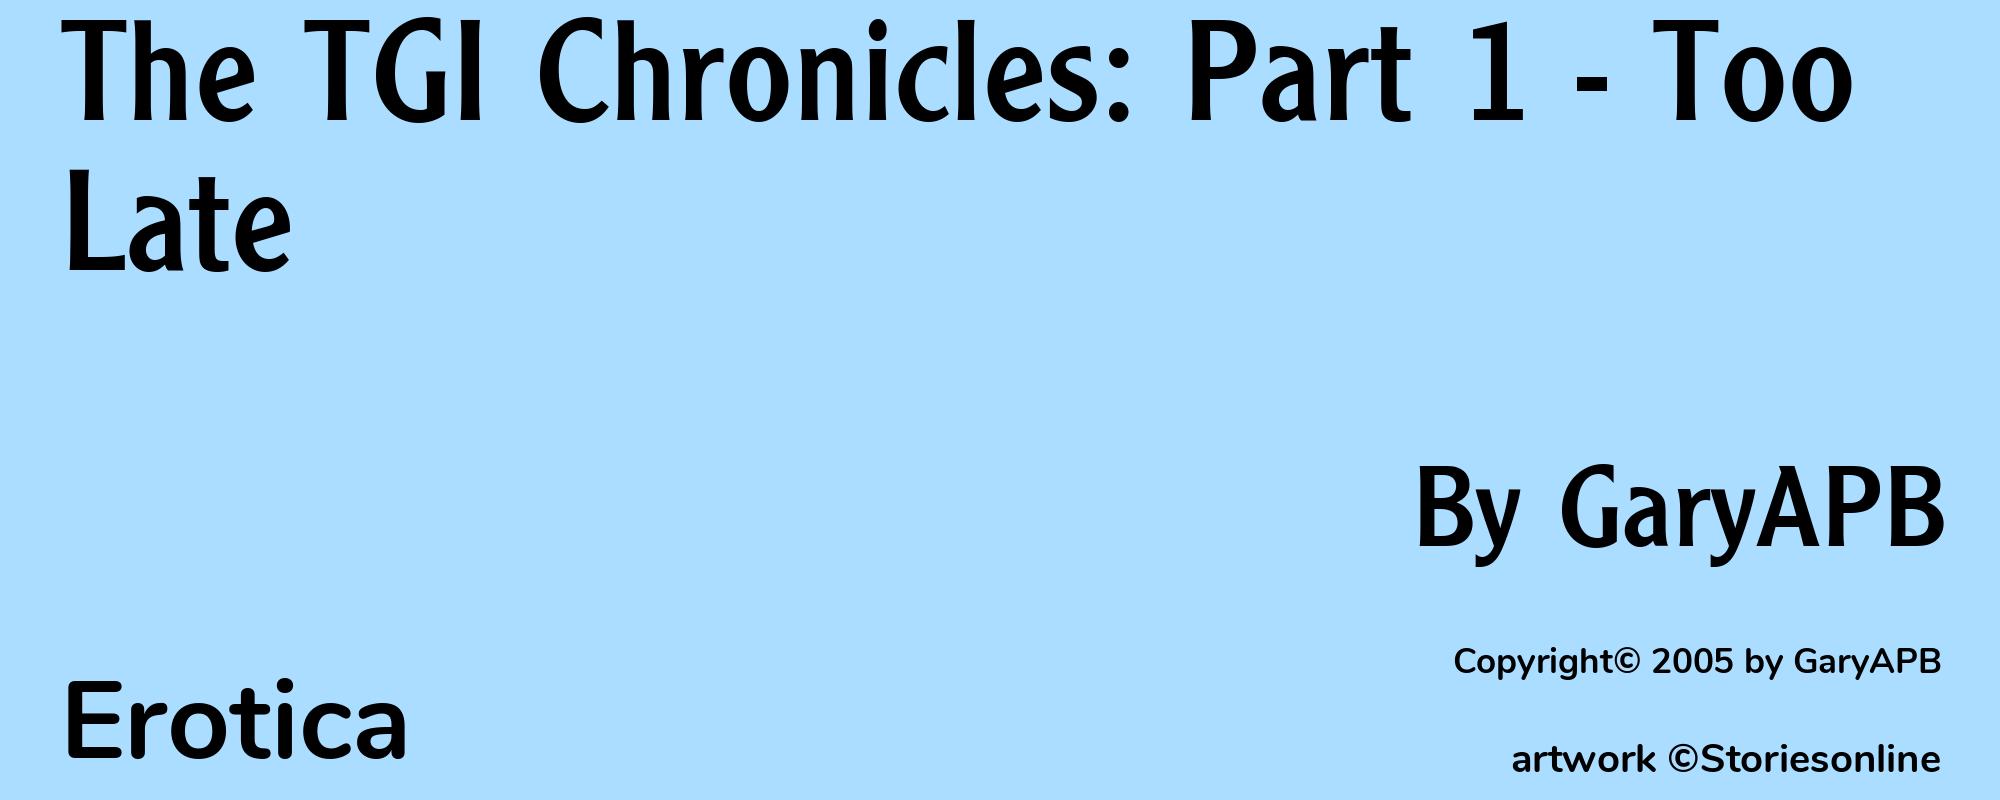 The TGI Chronicles: Part 1 - Too Late - Cover